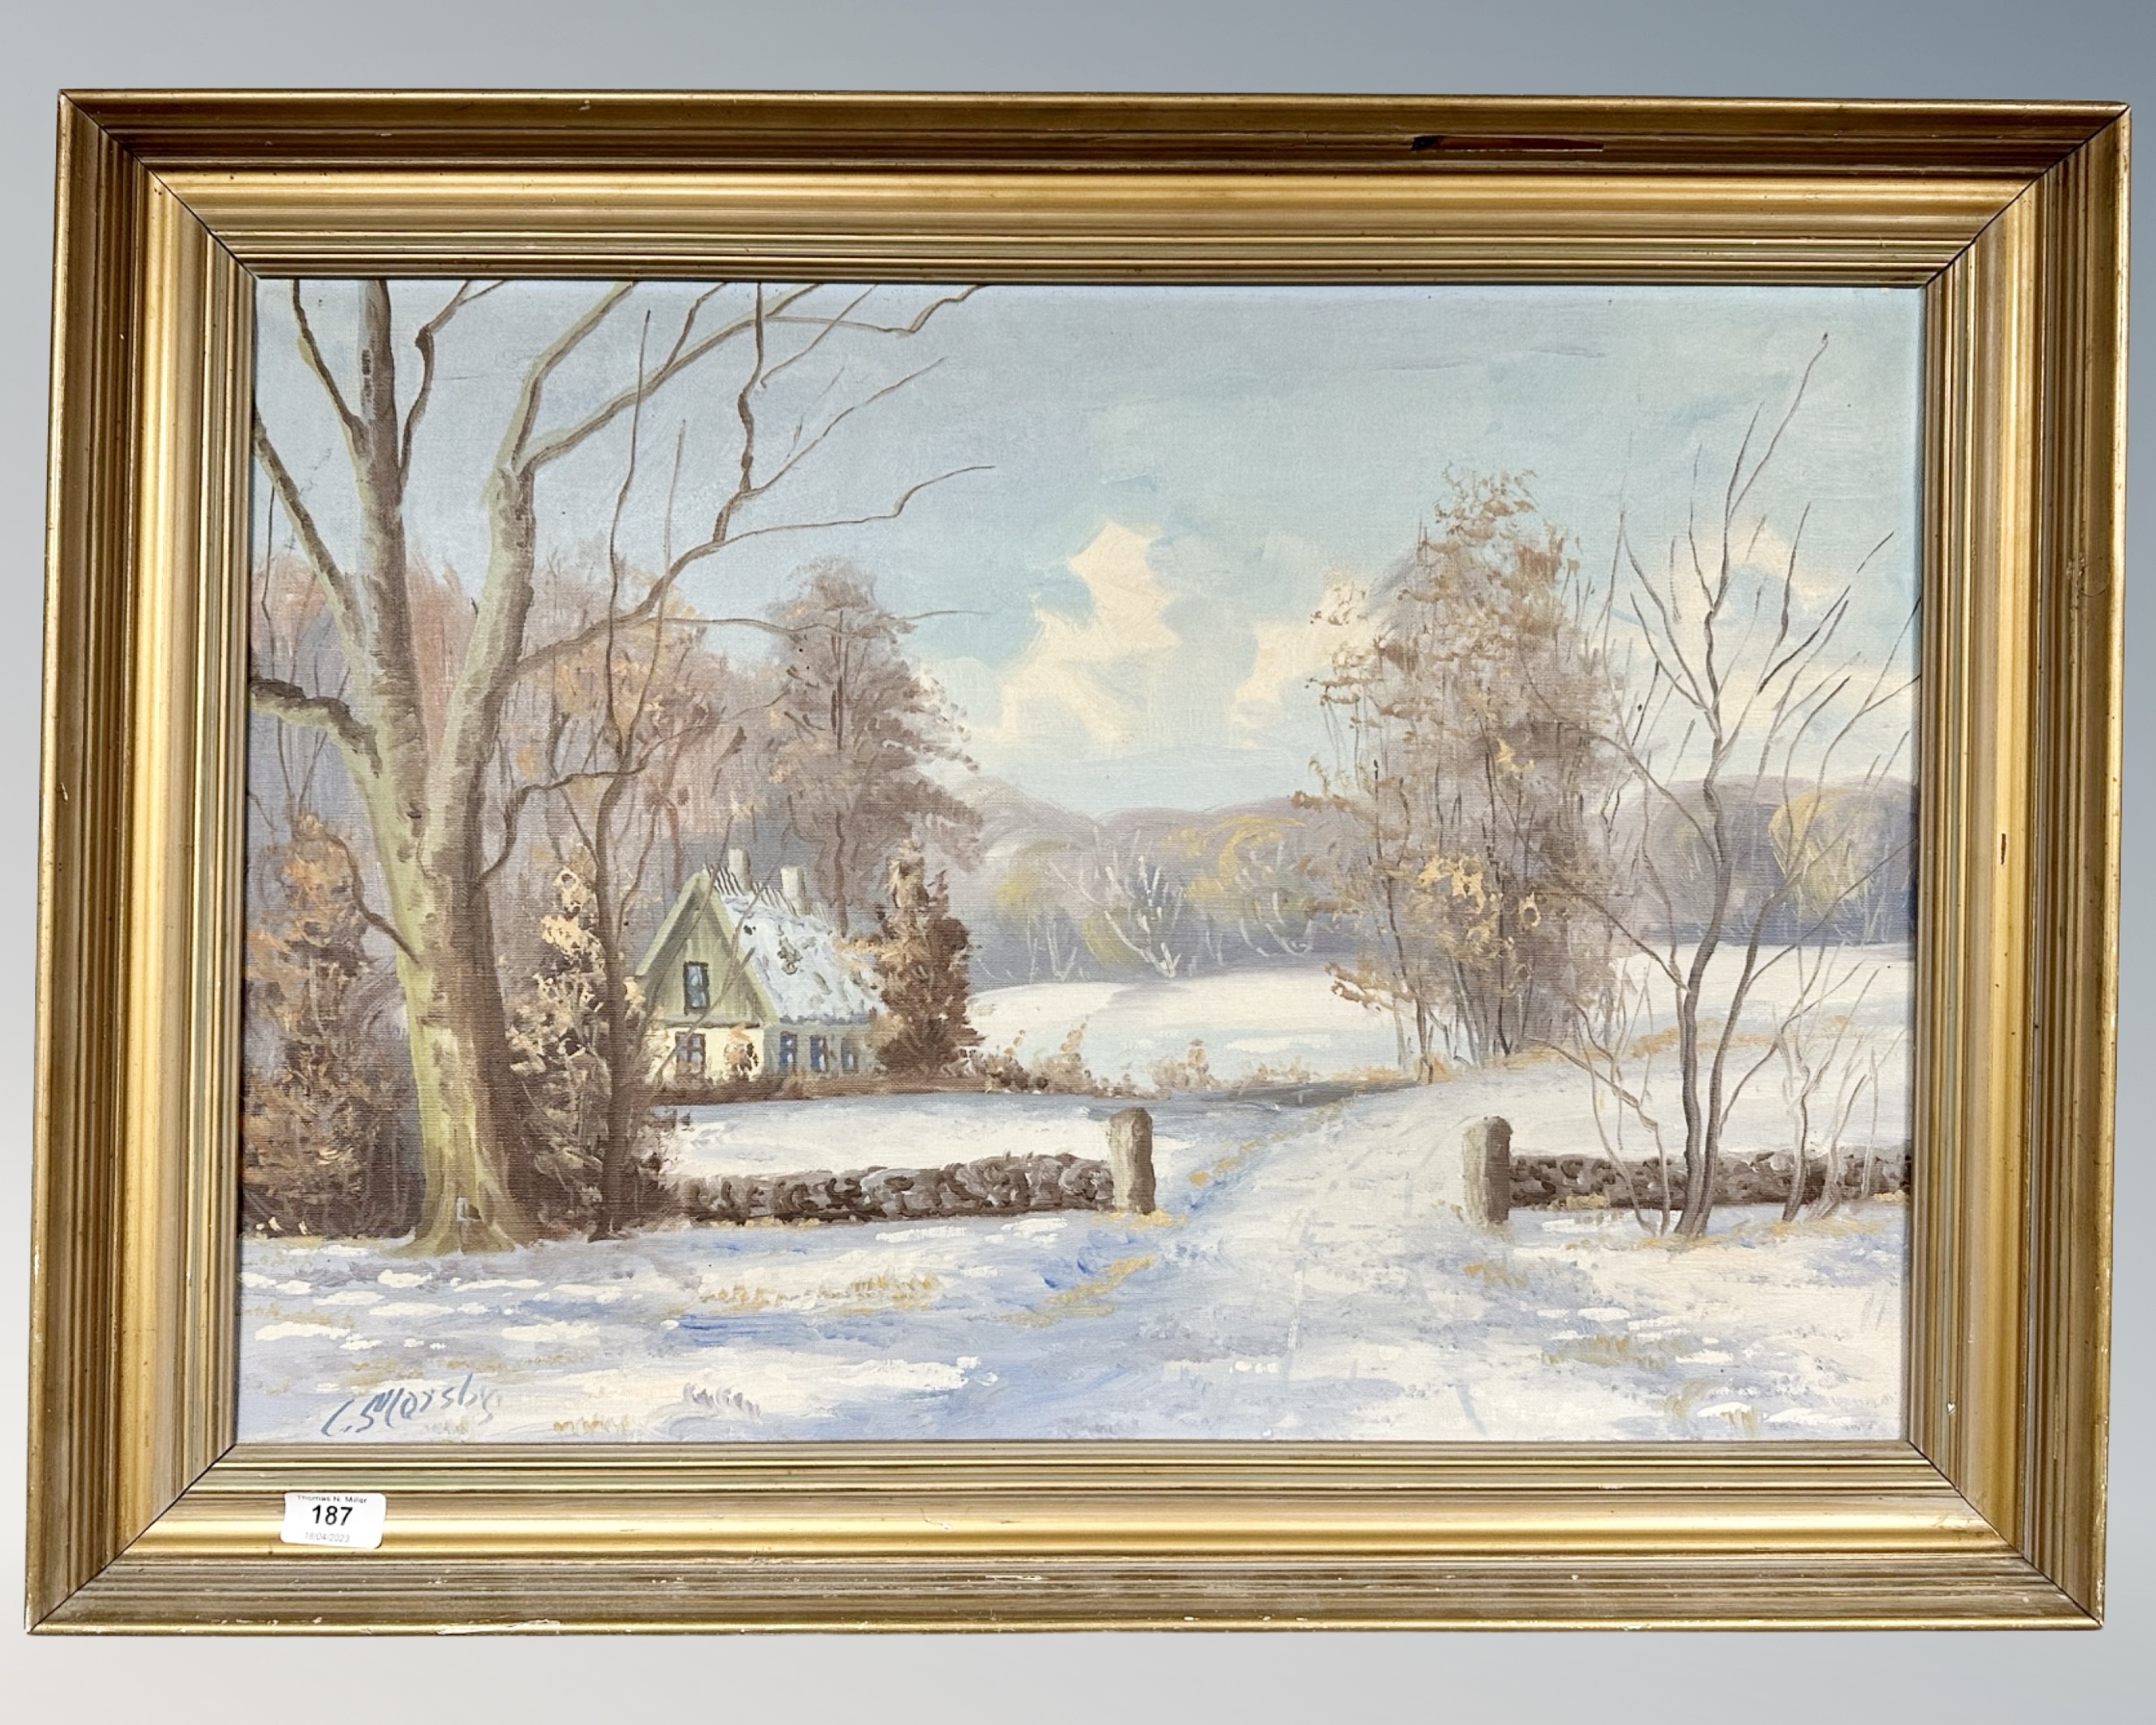 C. Slossby : Cottage in a Winter Landscape, oil on canvas, 65cm by 45cm.